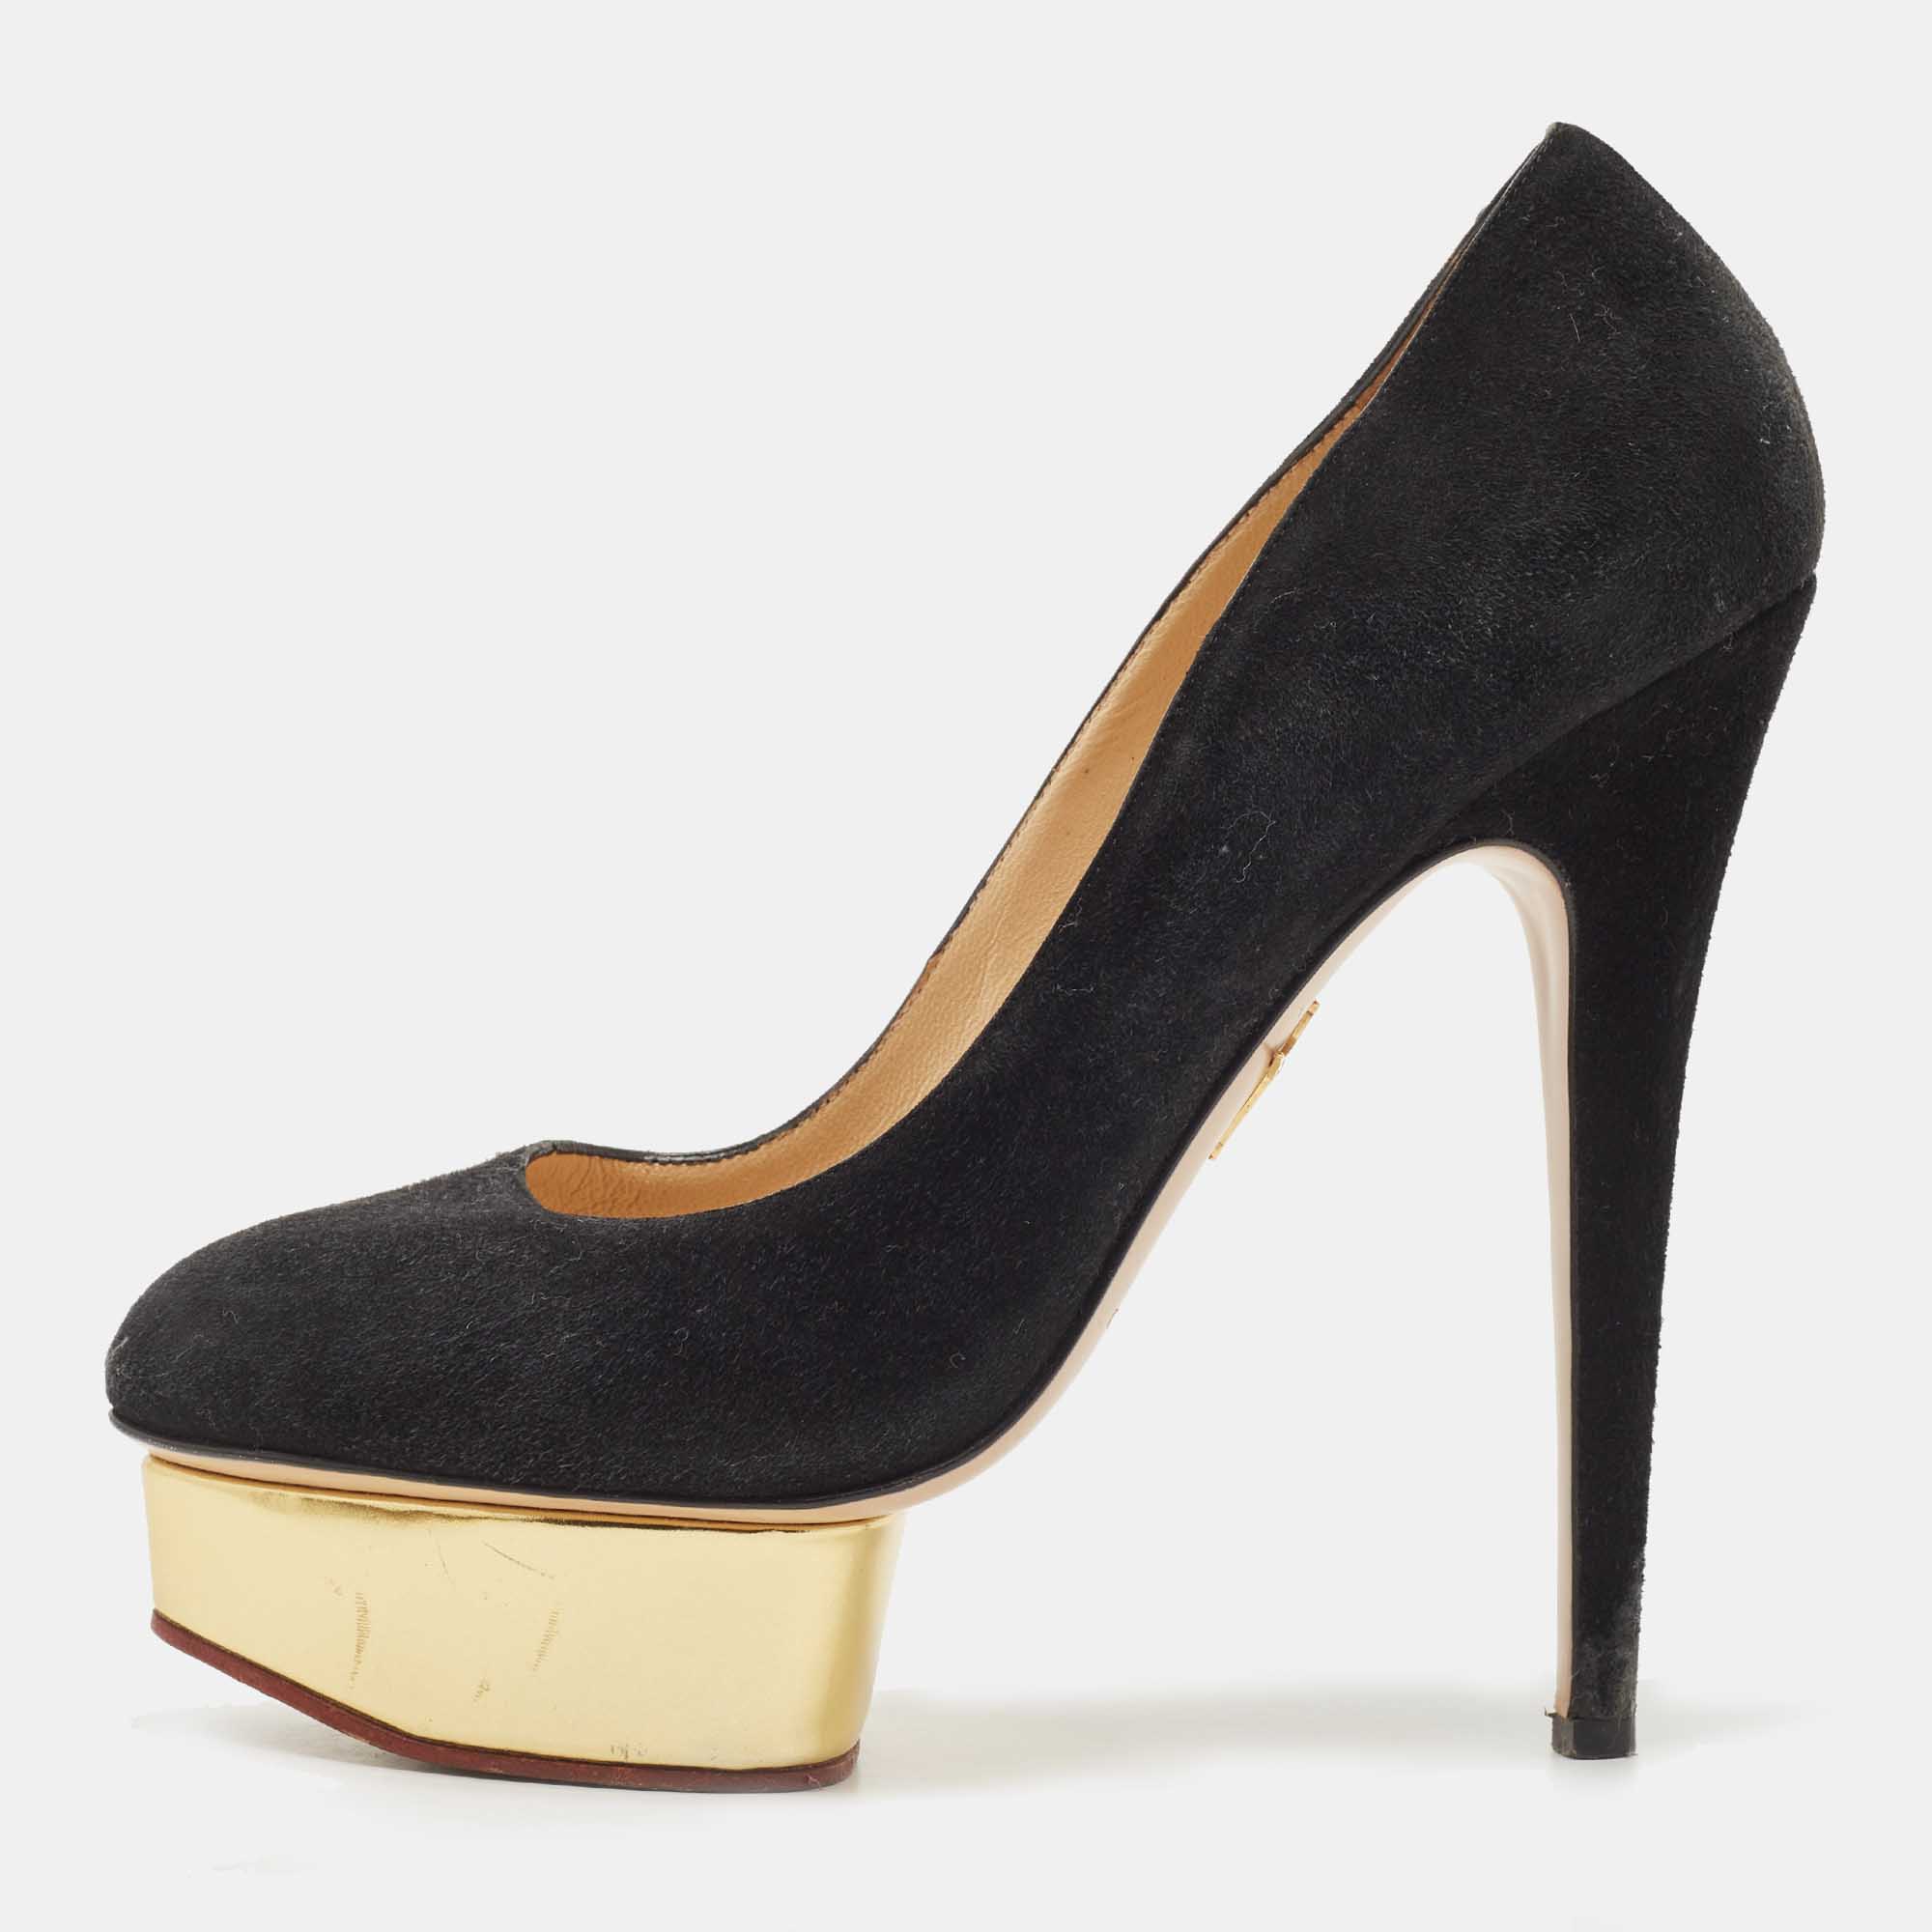 Pre-owned Charlotte Olympia Black Suede Dolly Pumps Size 39